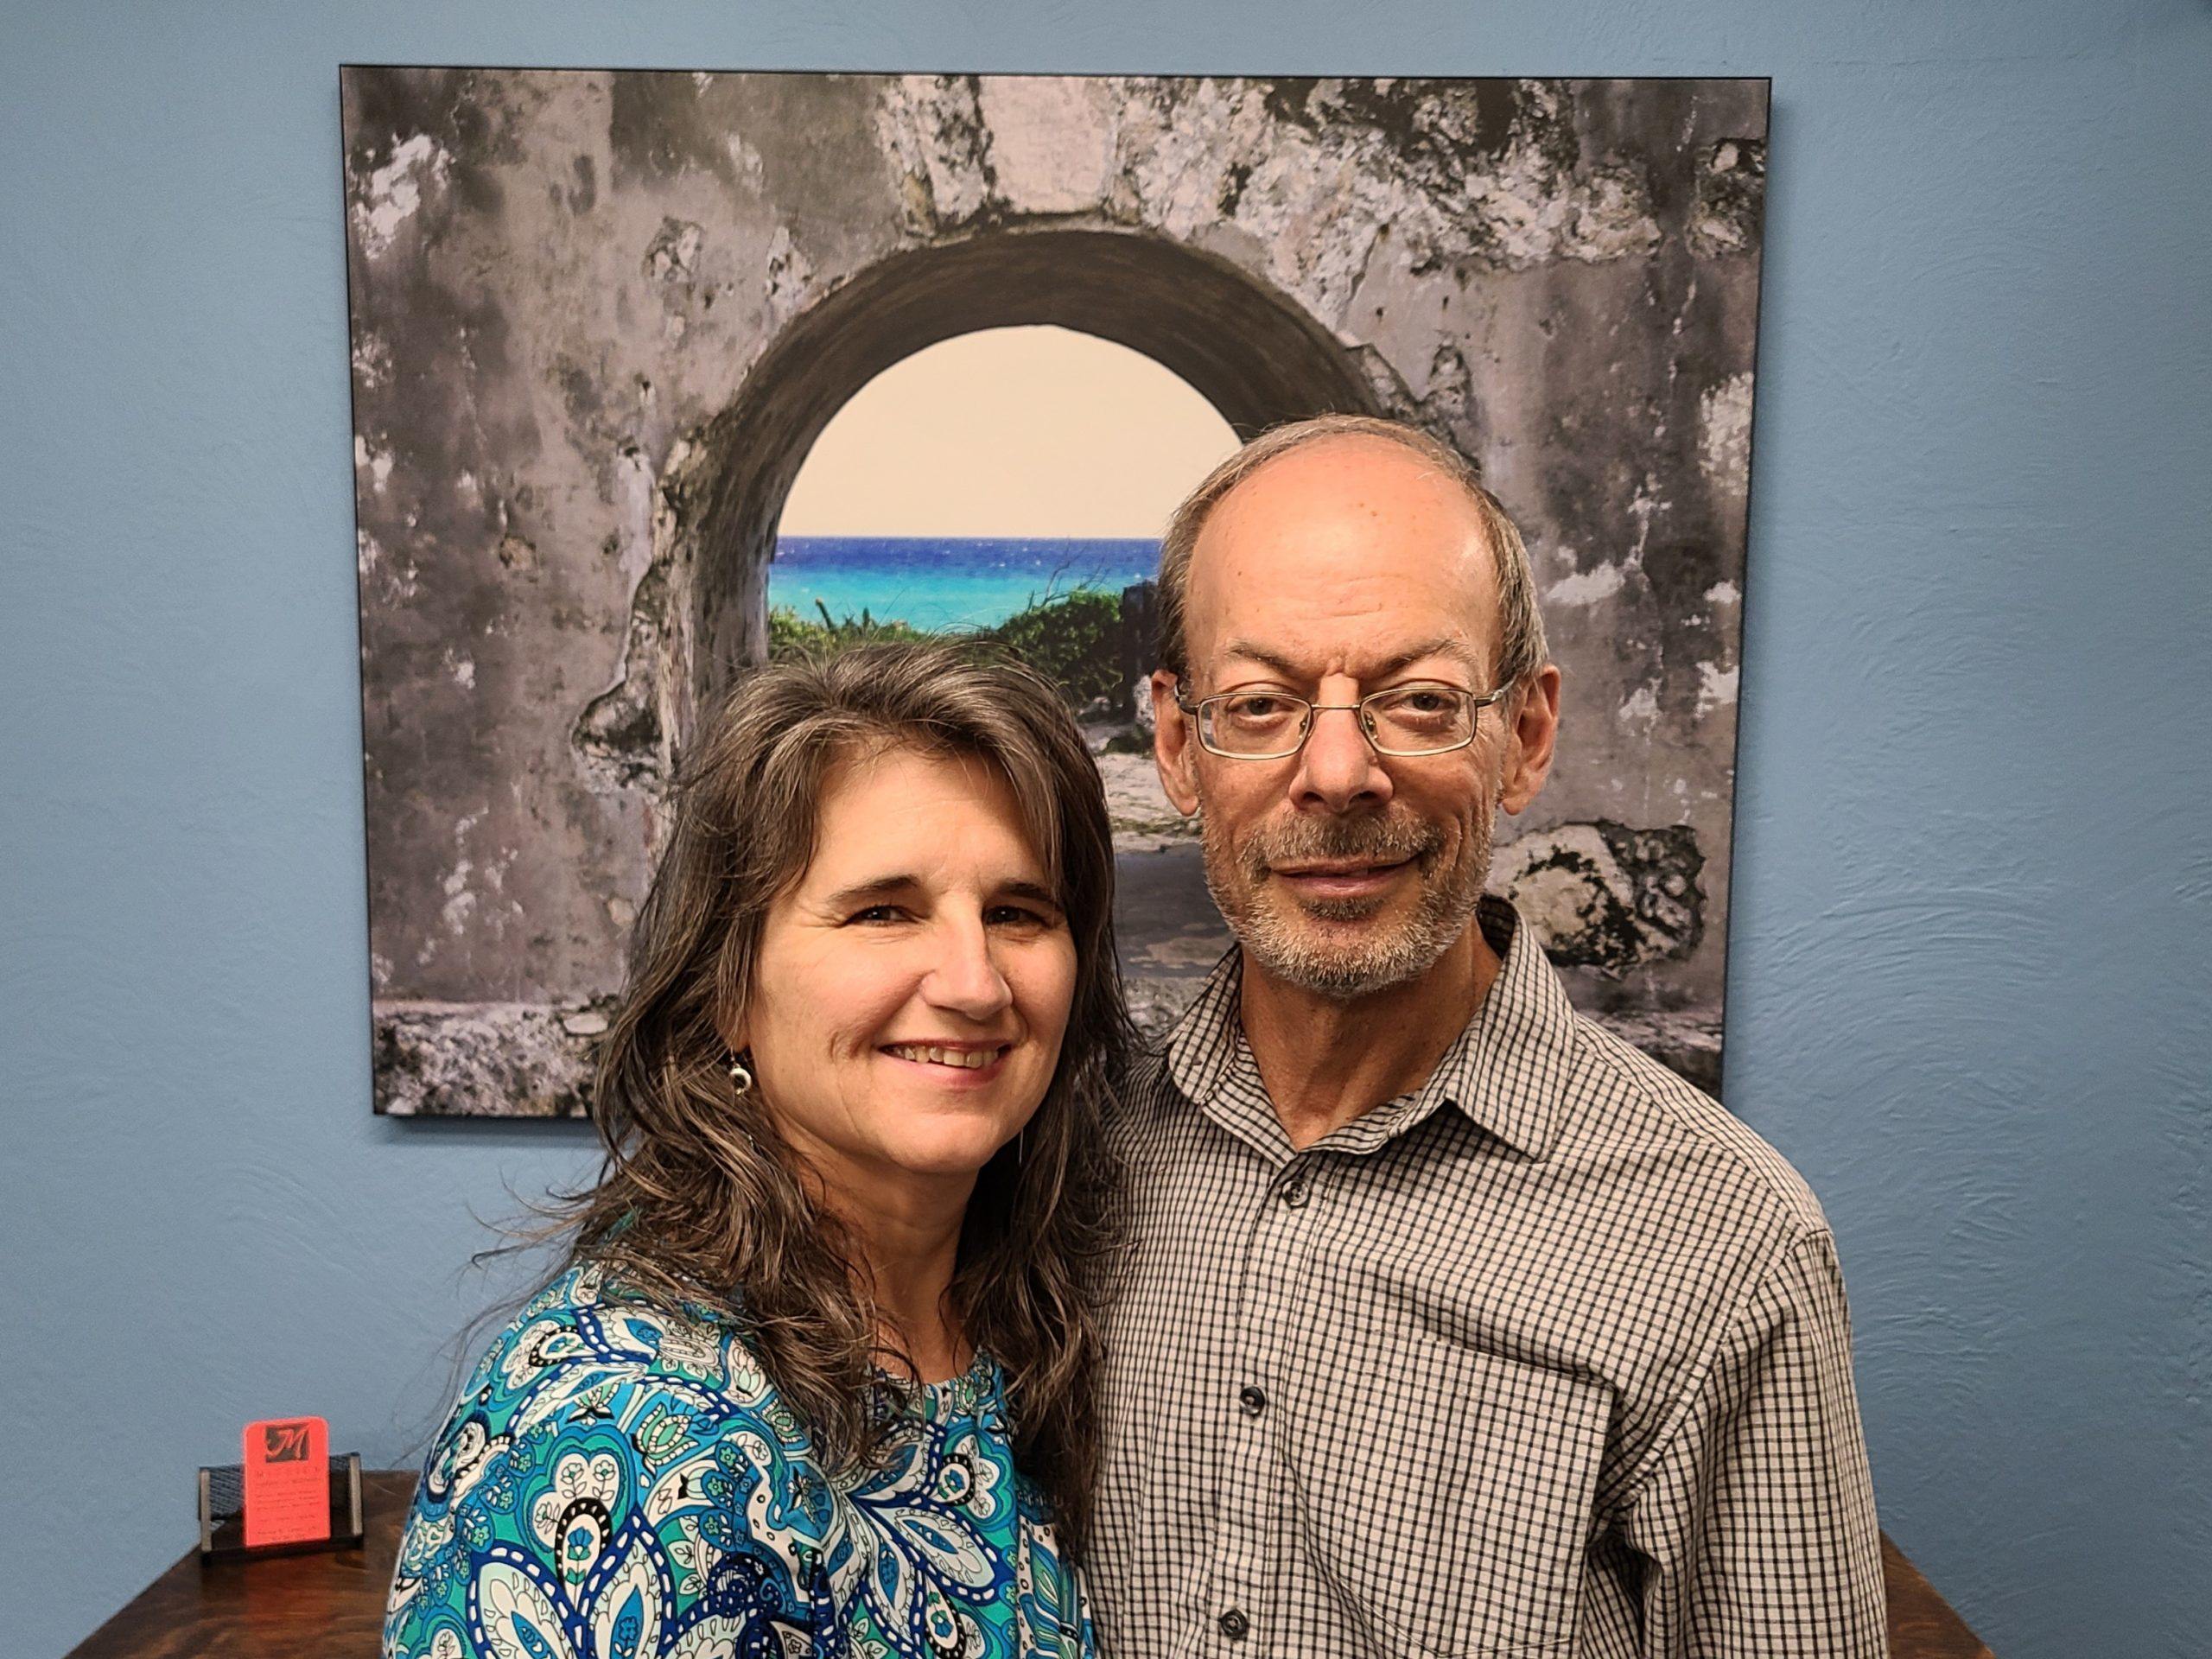 Chiropractor, Dr. Fred Lewin and Karise Lewin